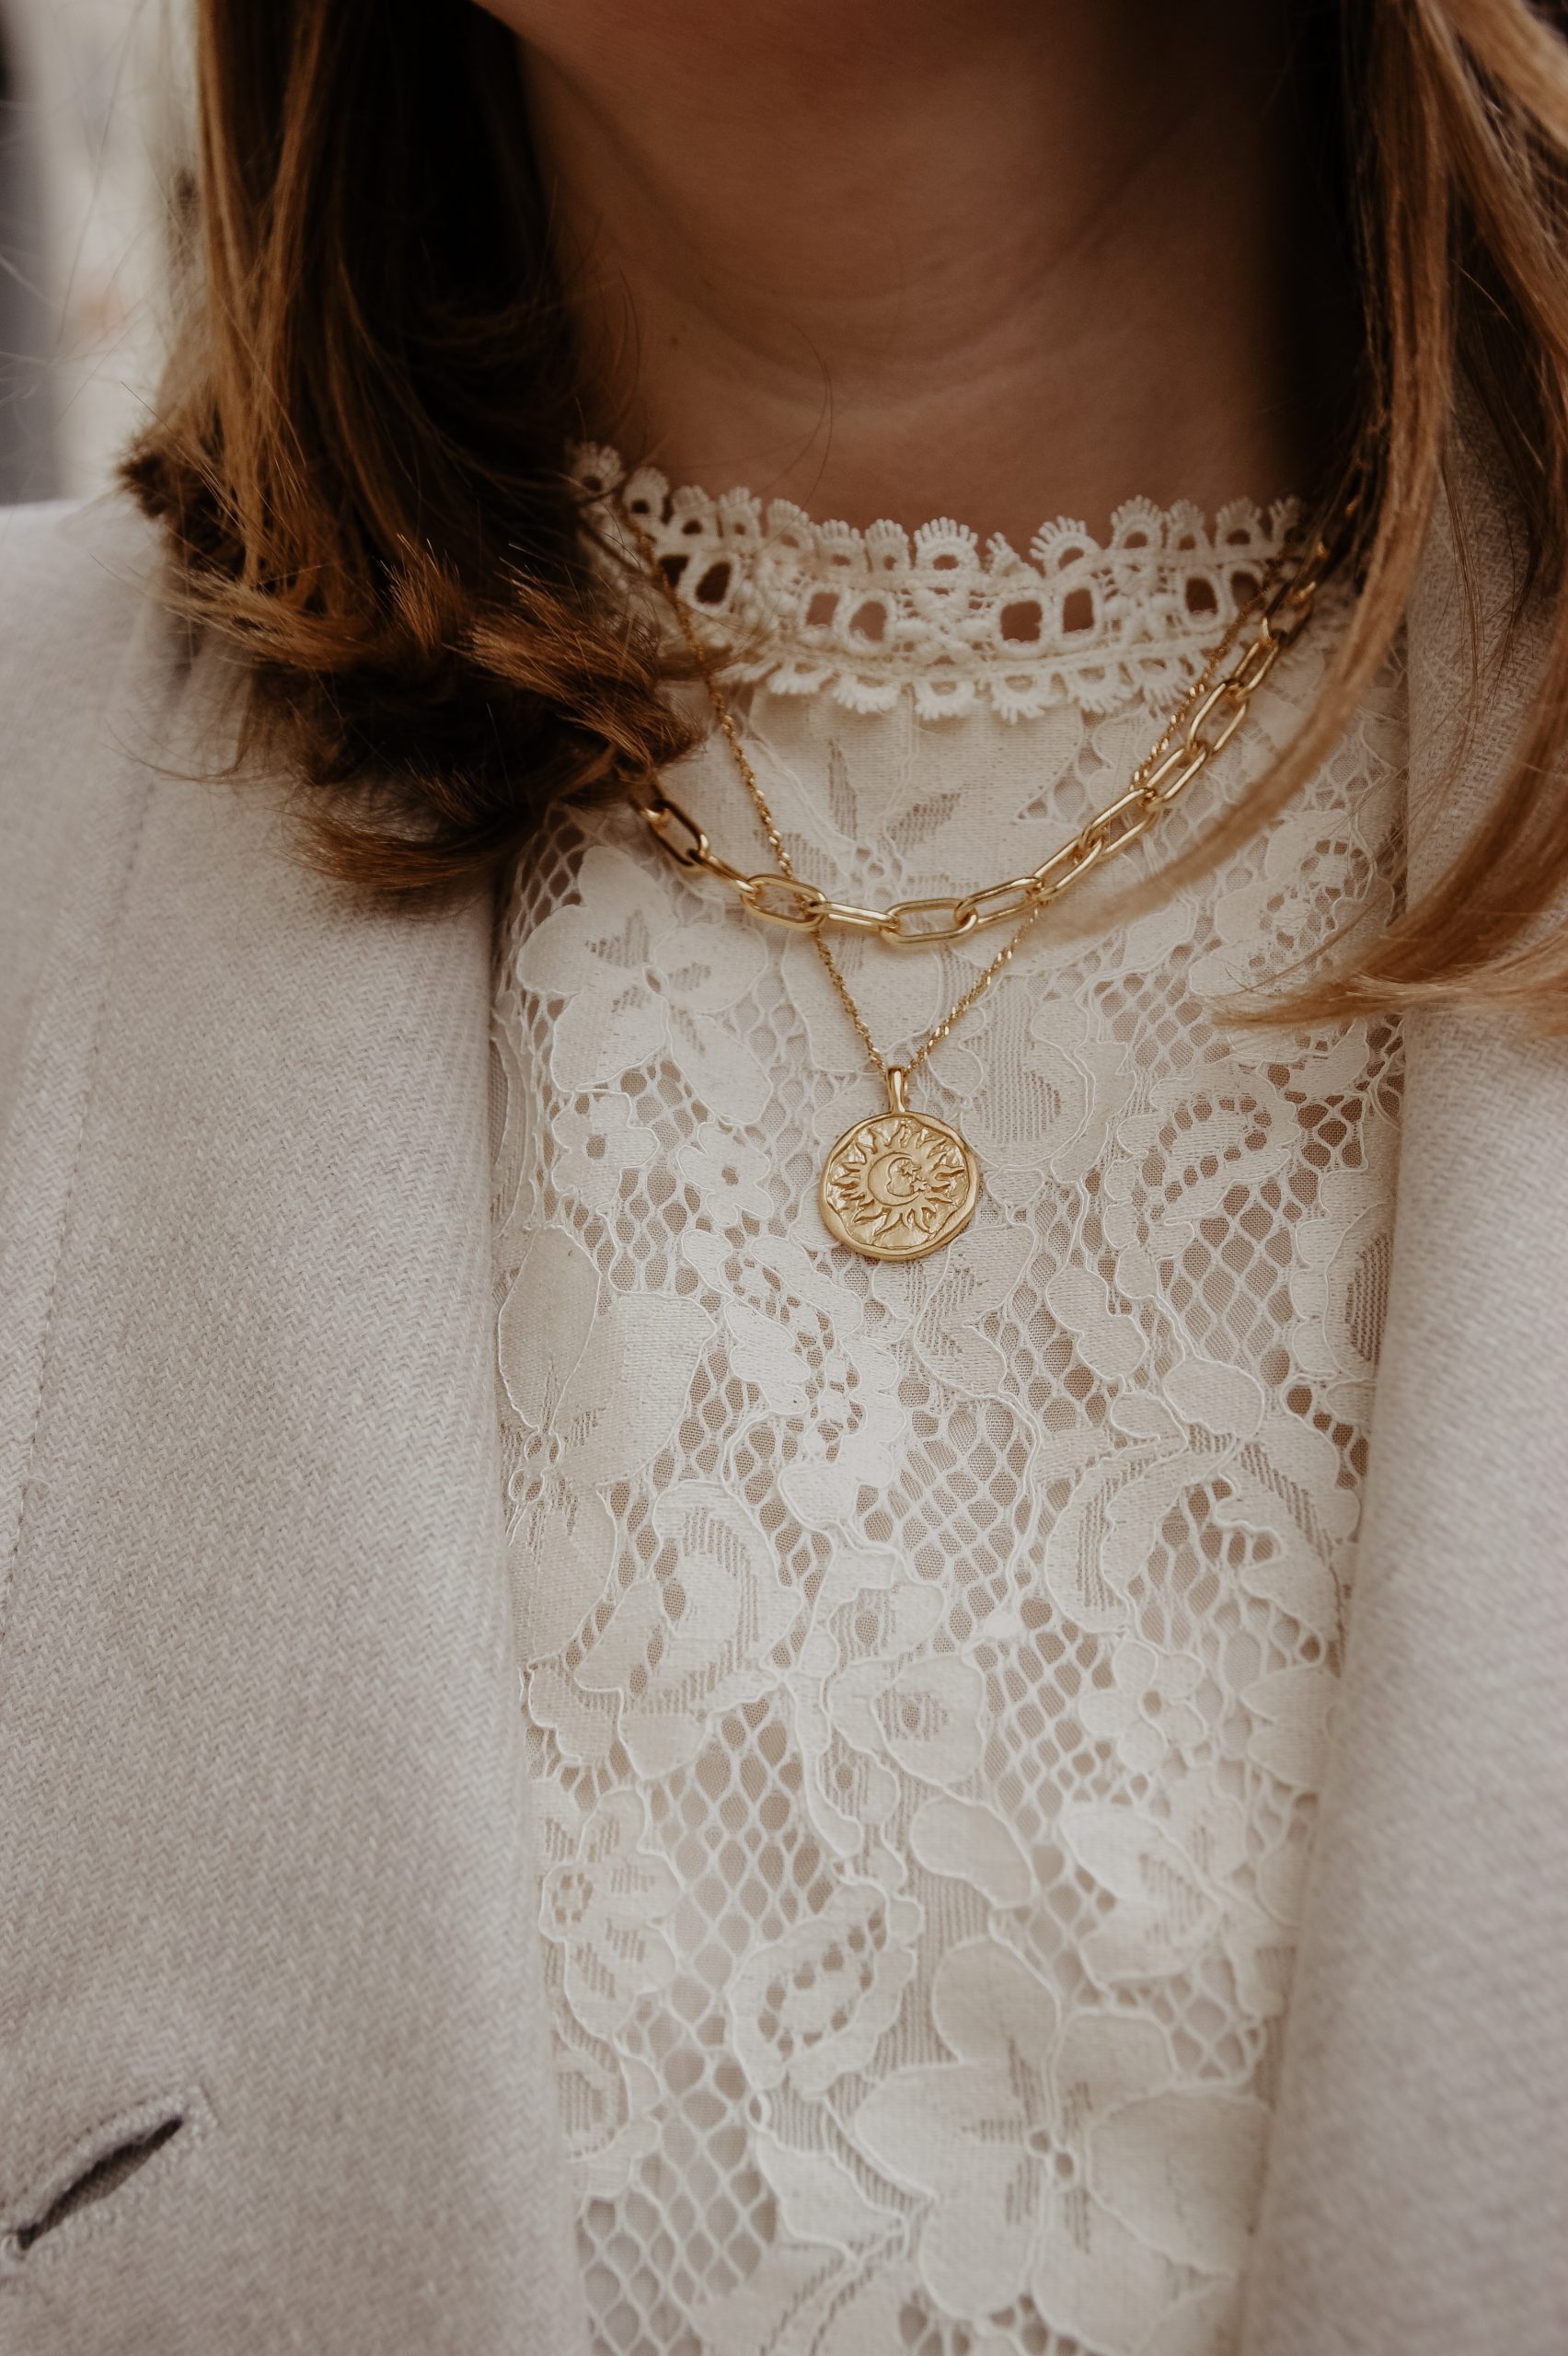 The Chunky Chain Necklace Trend Is Back – Savoir Flair